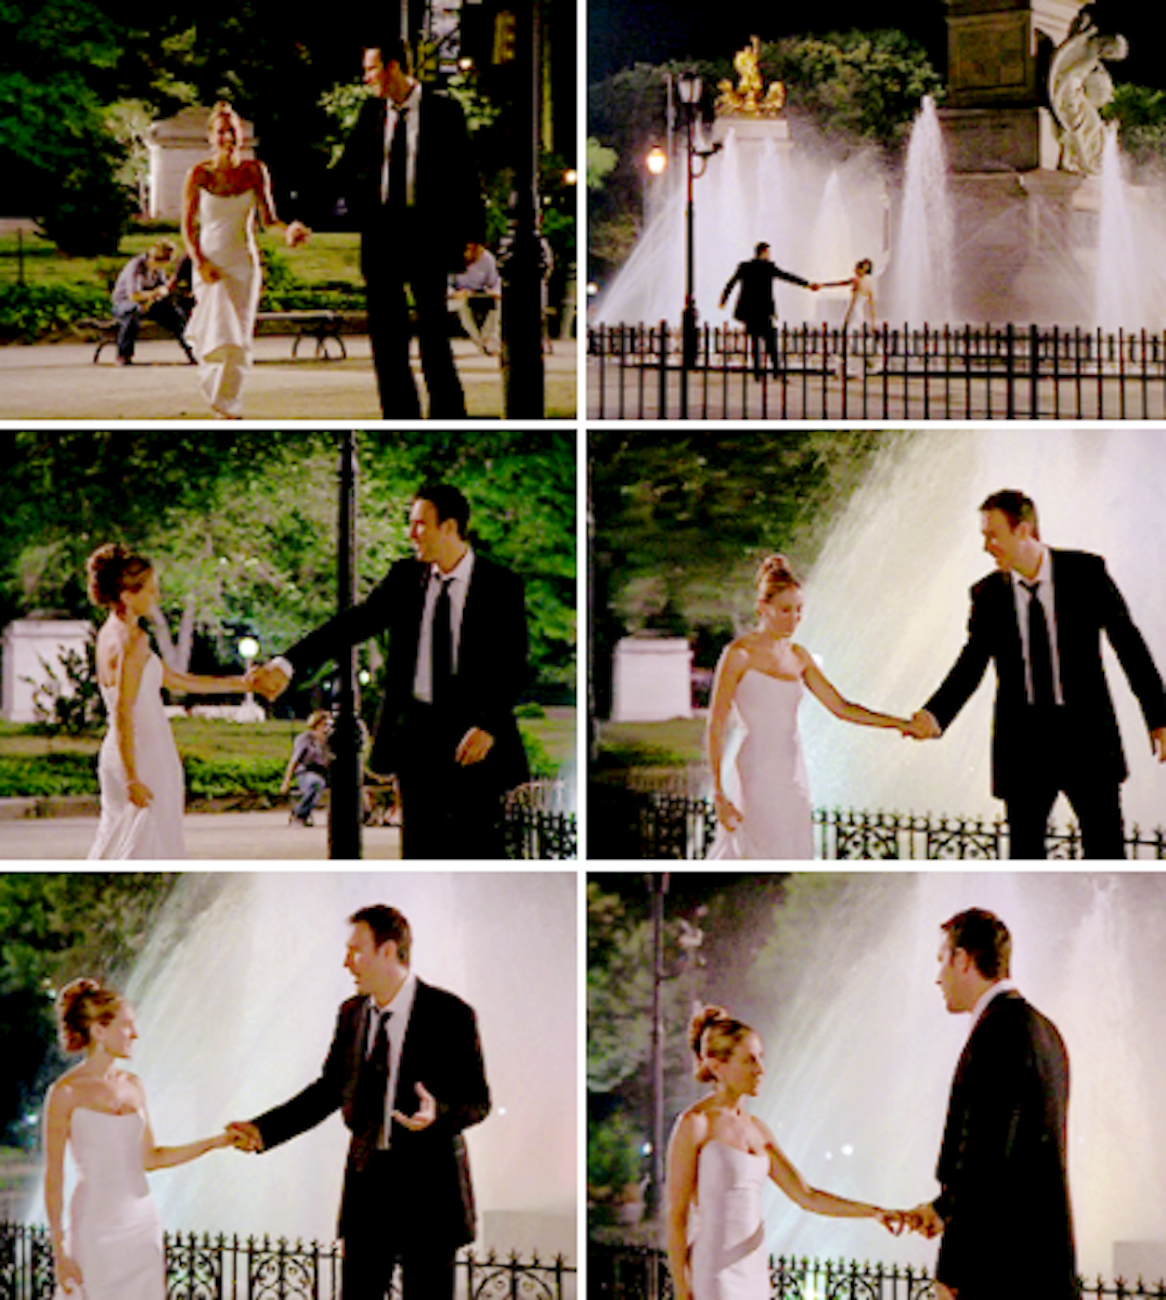 Carrie and Aidan walking around together in Columbus Circle at night, holding hands